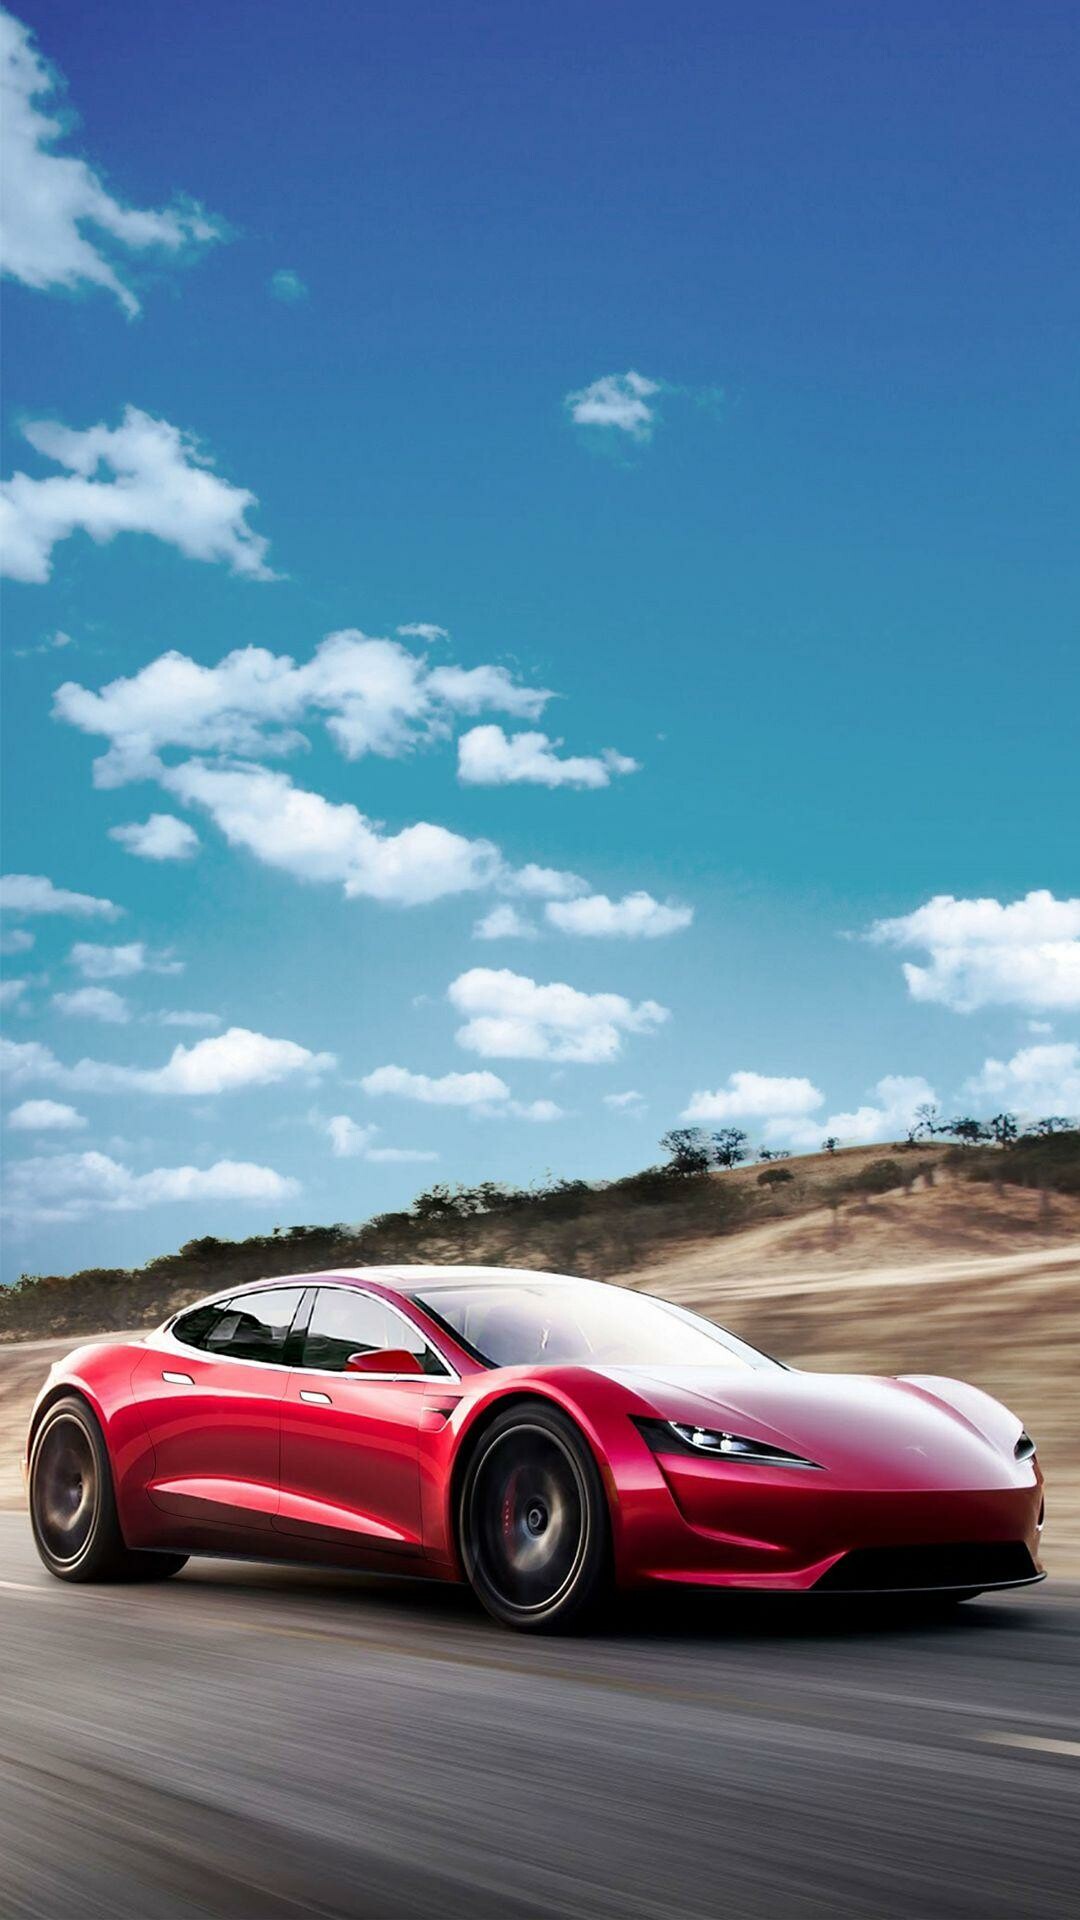 Tesla Model S: All-electric sedan, Setting world records as the first production vehicle that can go 0 to 60 miles per hour in under 2 seconds. 1080x1920 Full HD Background.